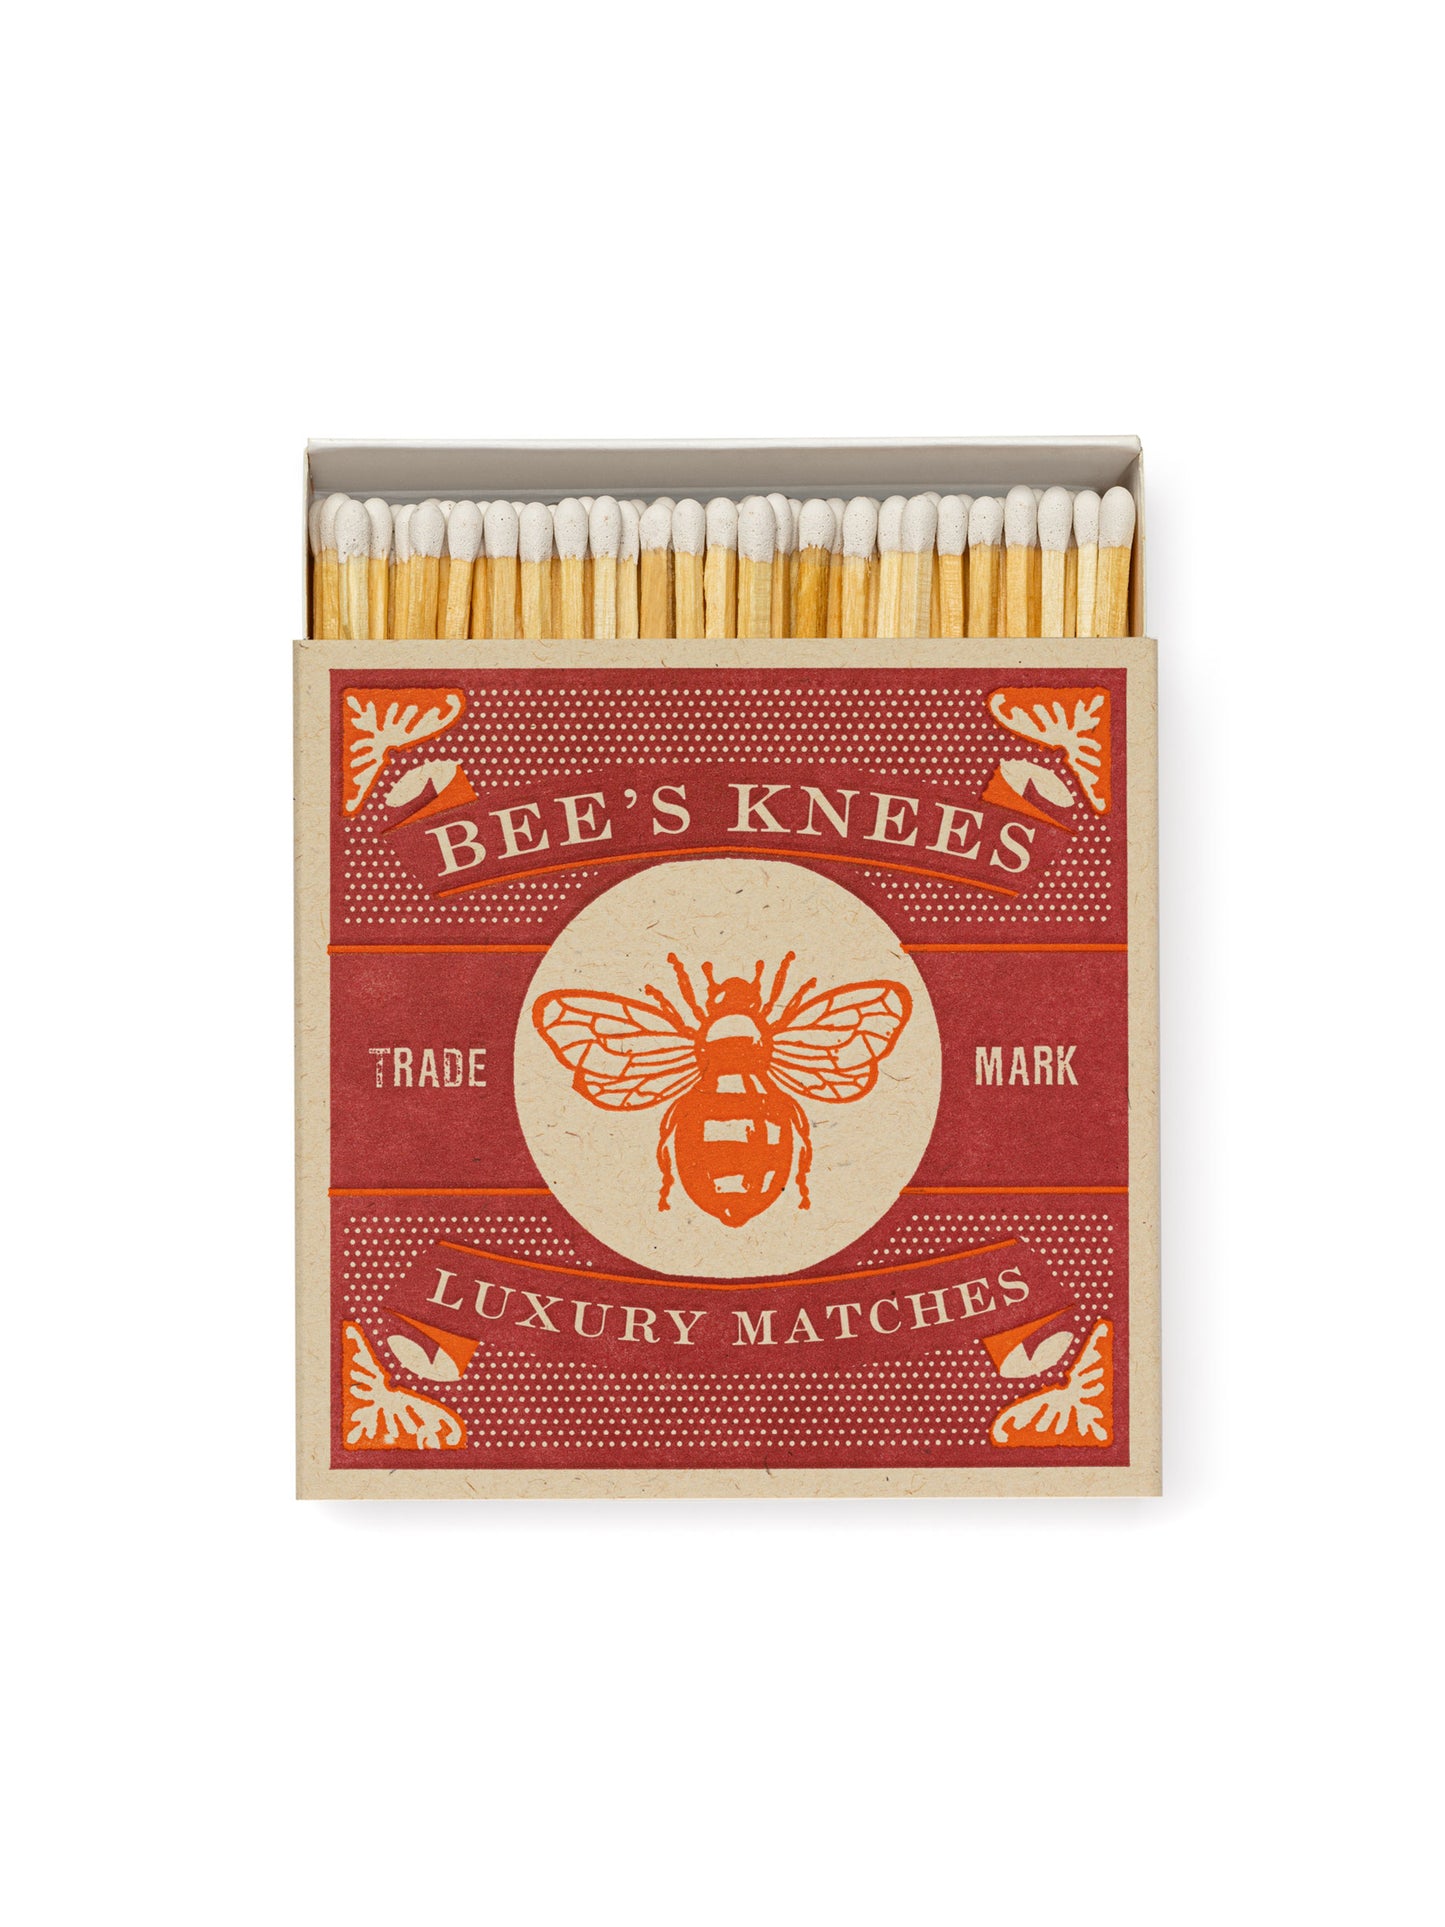 Archivist Gallery Bee Matchboxes Bees Knees Weston Table